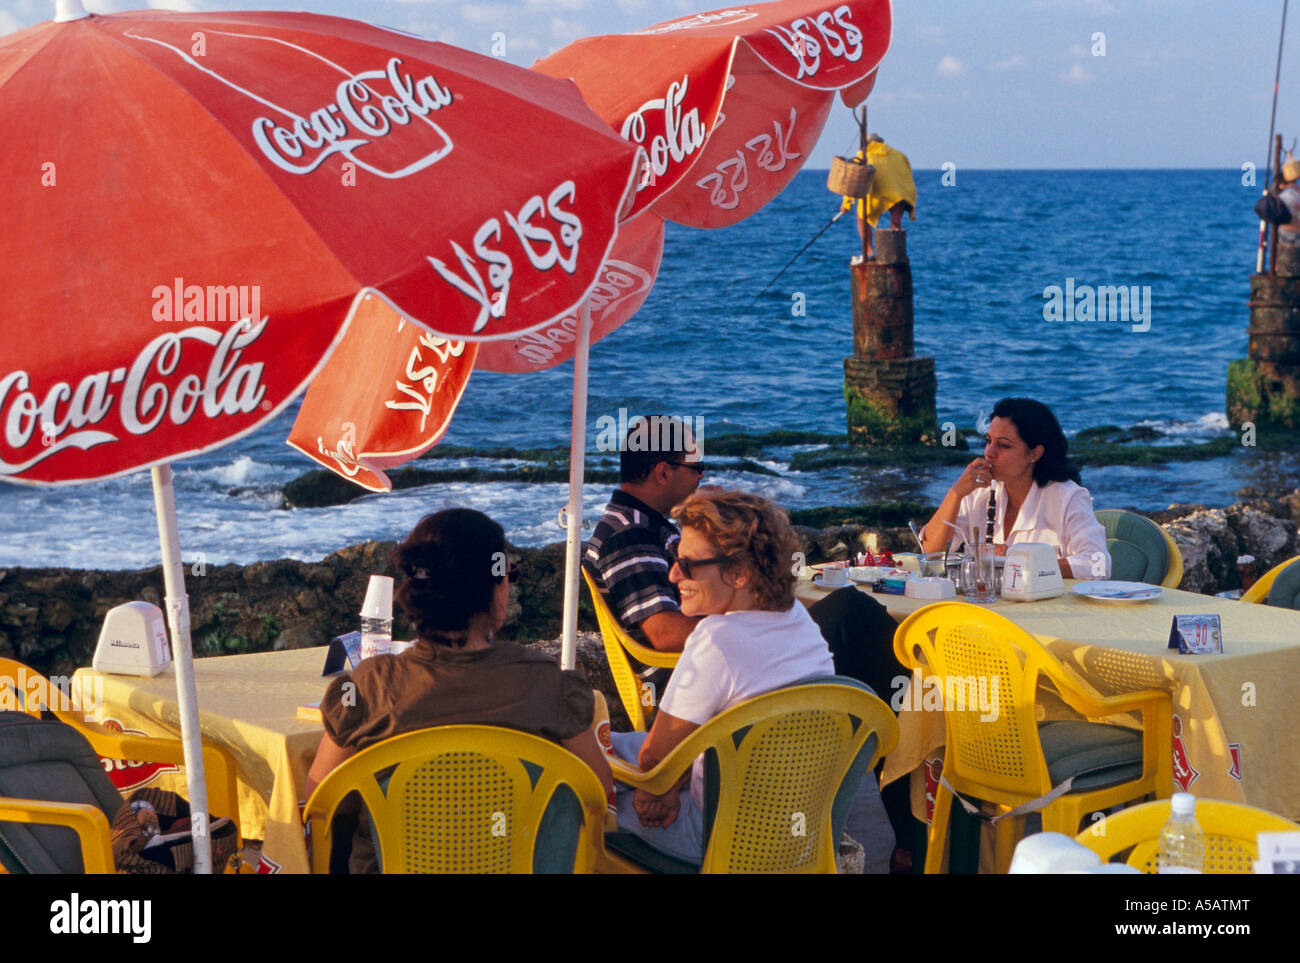 People at a seaside restaurant Stock Photo